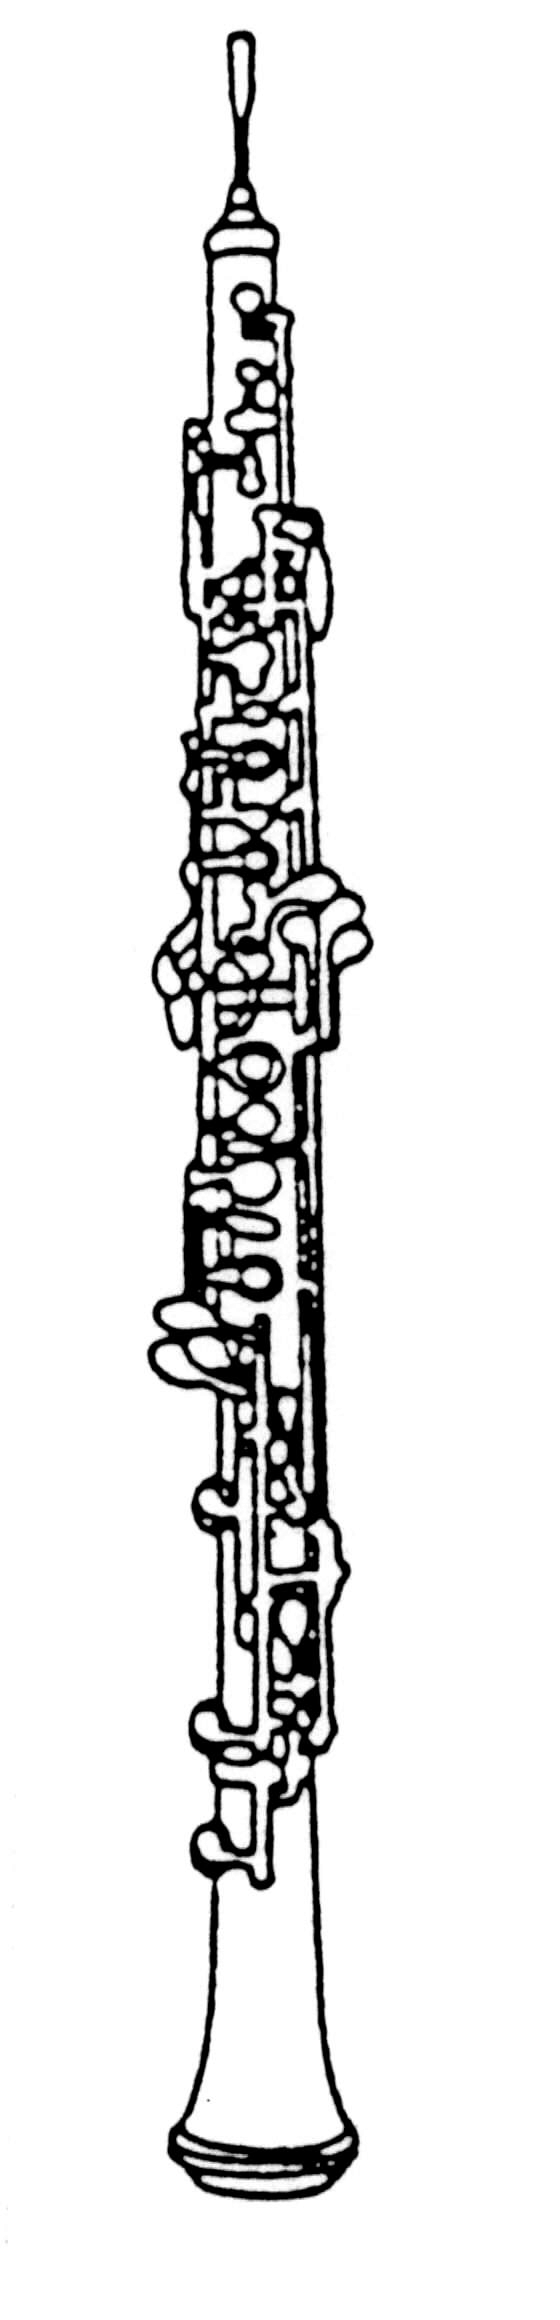 Oboe Coloring Page - High quality mobile wallpaper | wallpaper and 